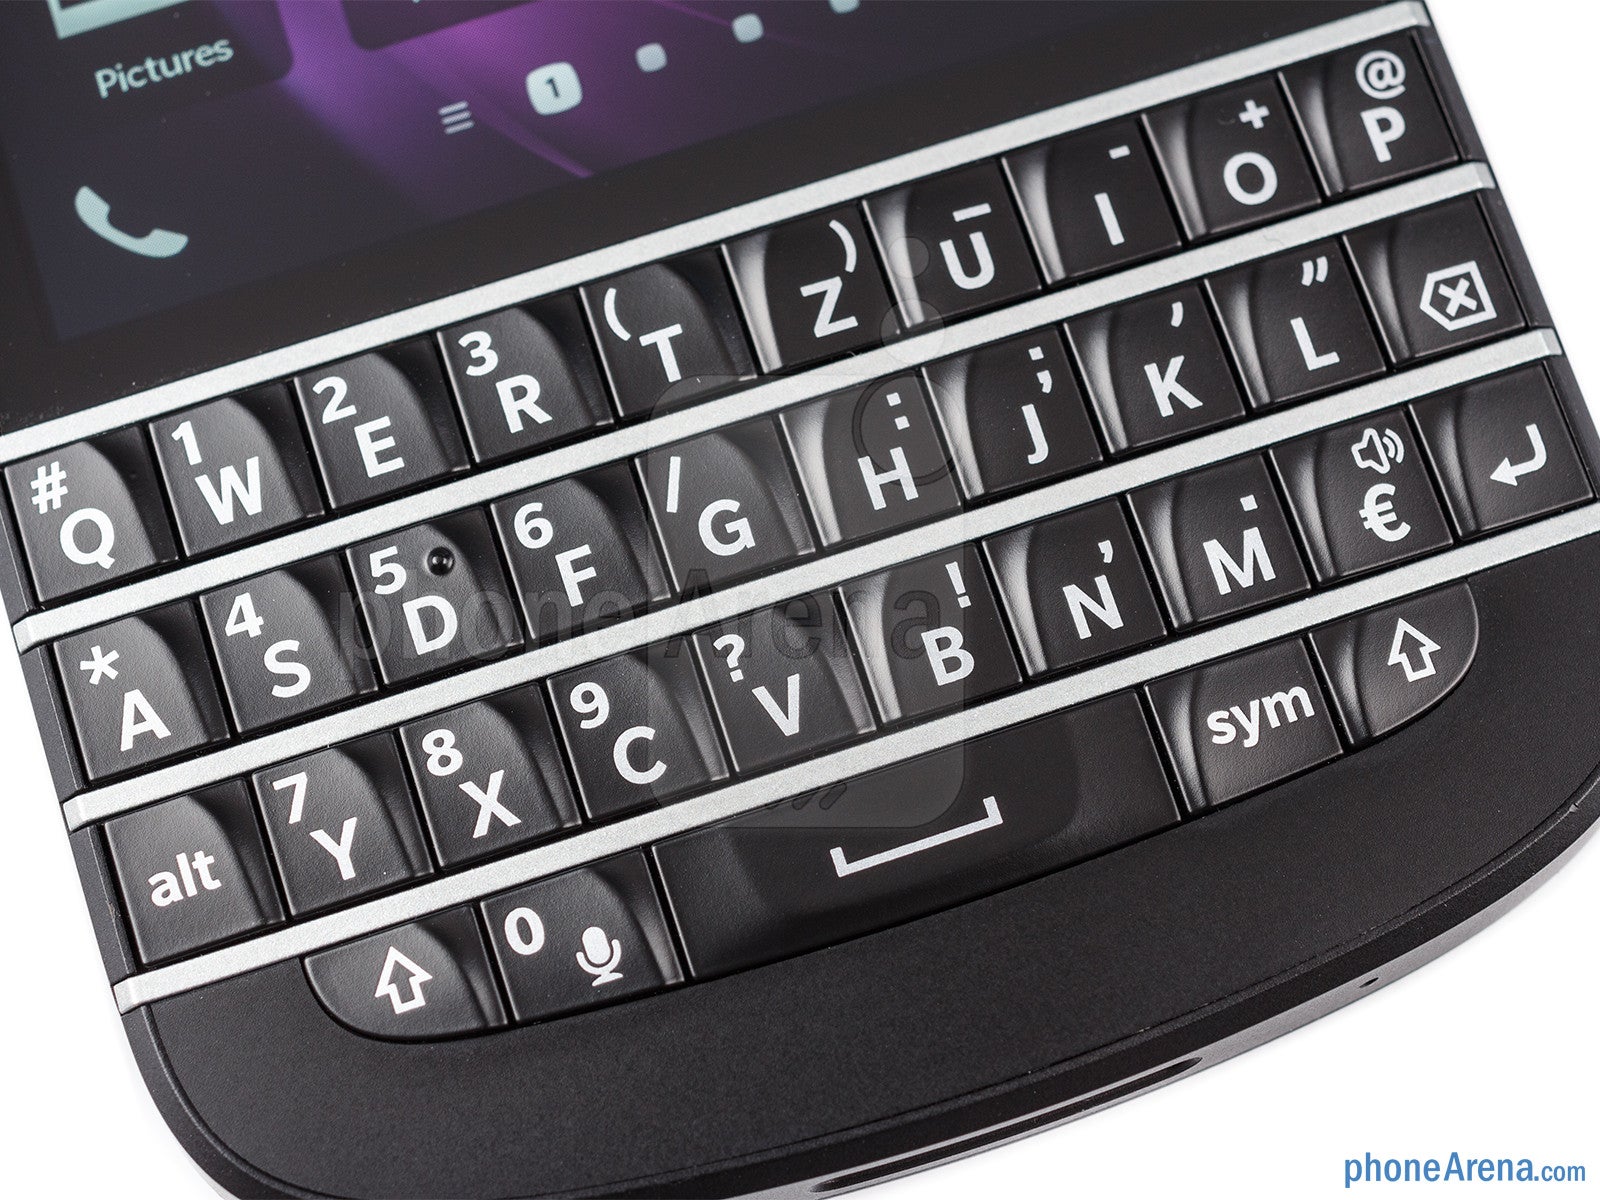 The physical QWERTY keyboard of the BlackBerry Q10 - BlackBerry Q10 Review